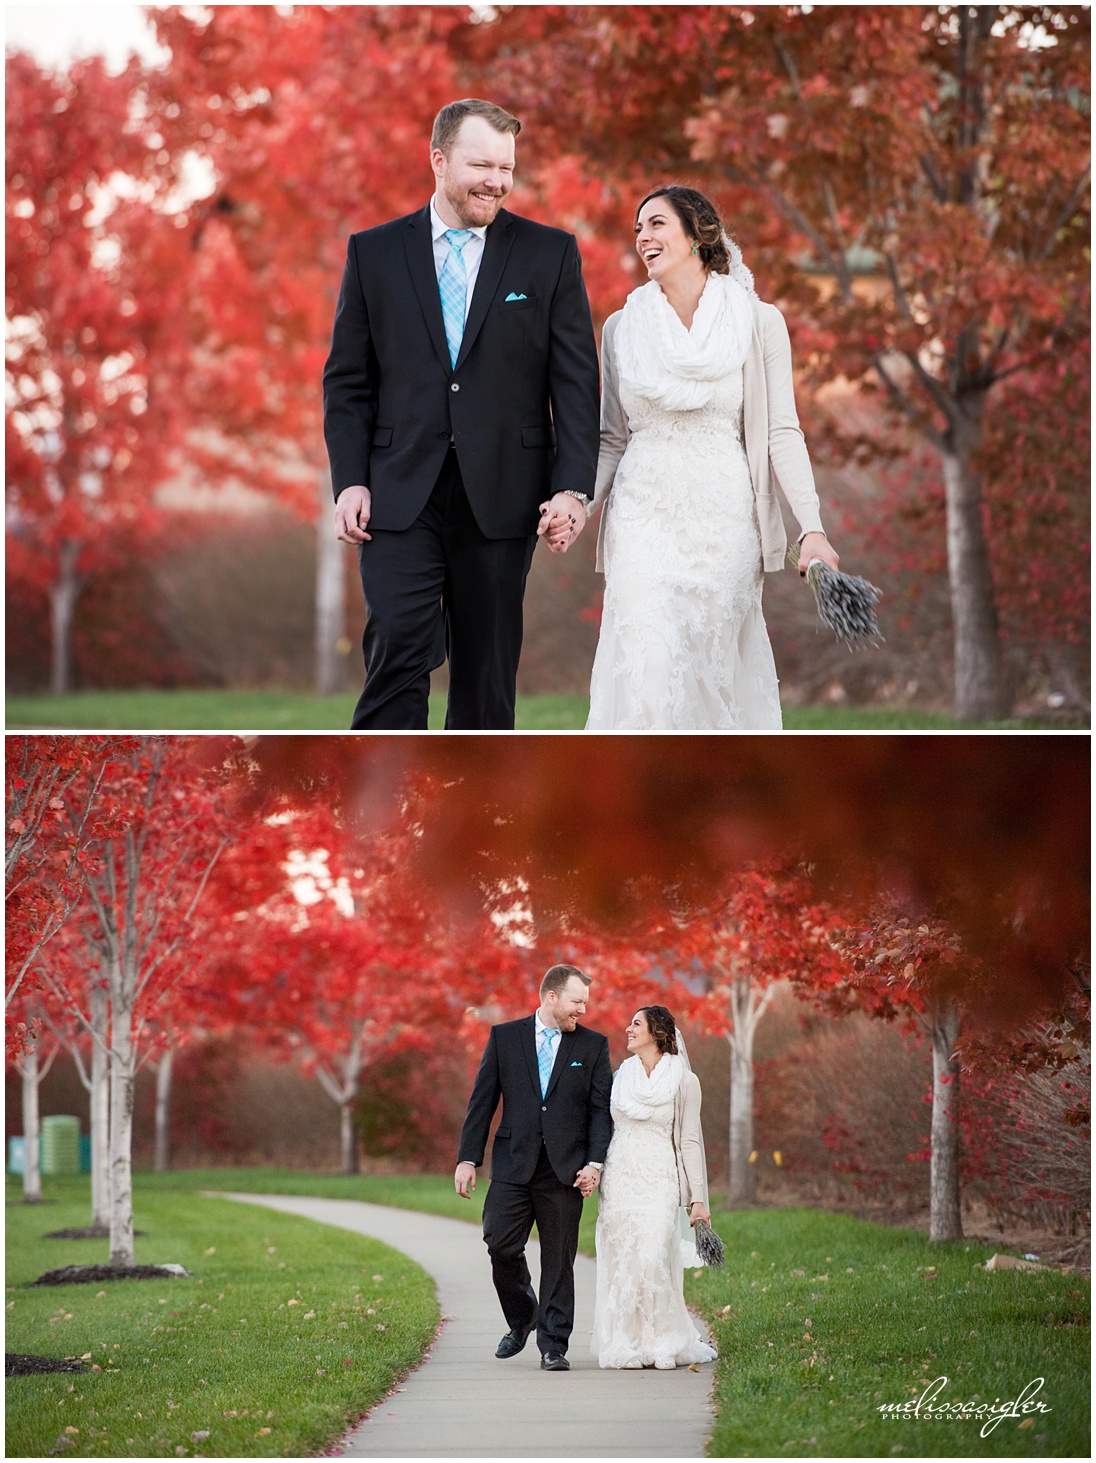 Bride and groom in front of red trees